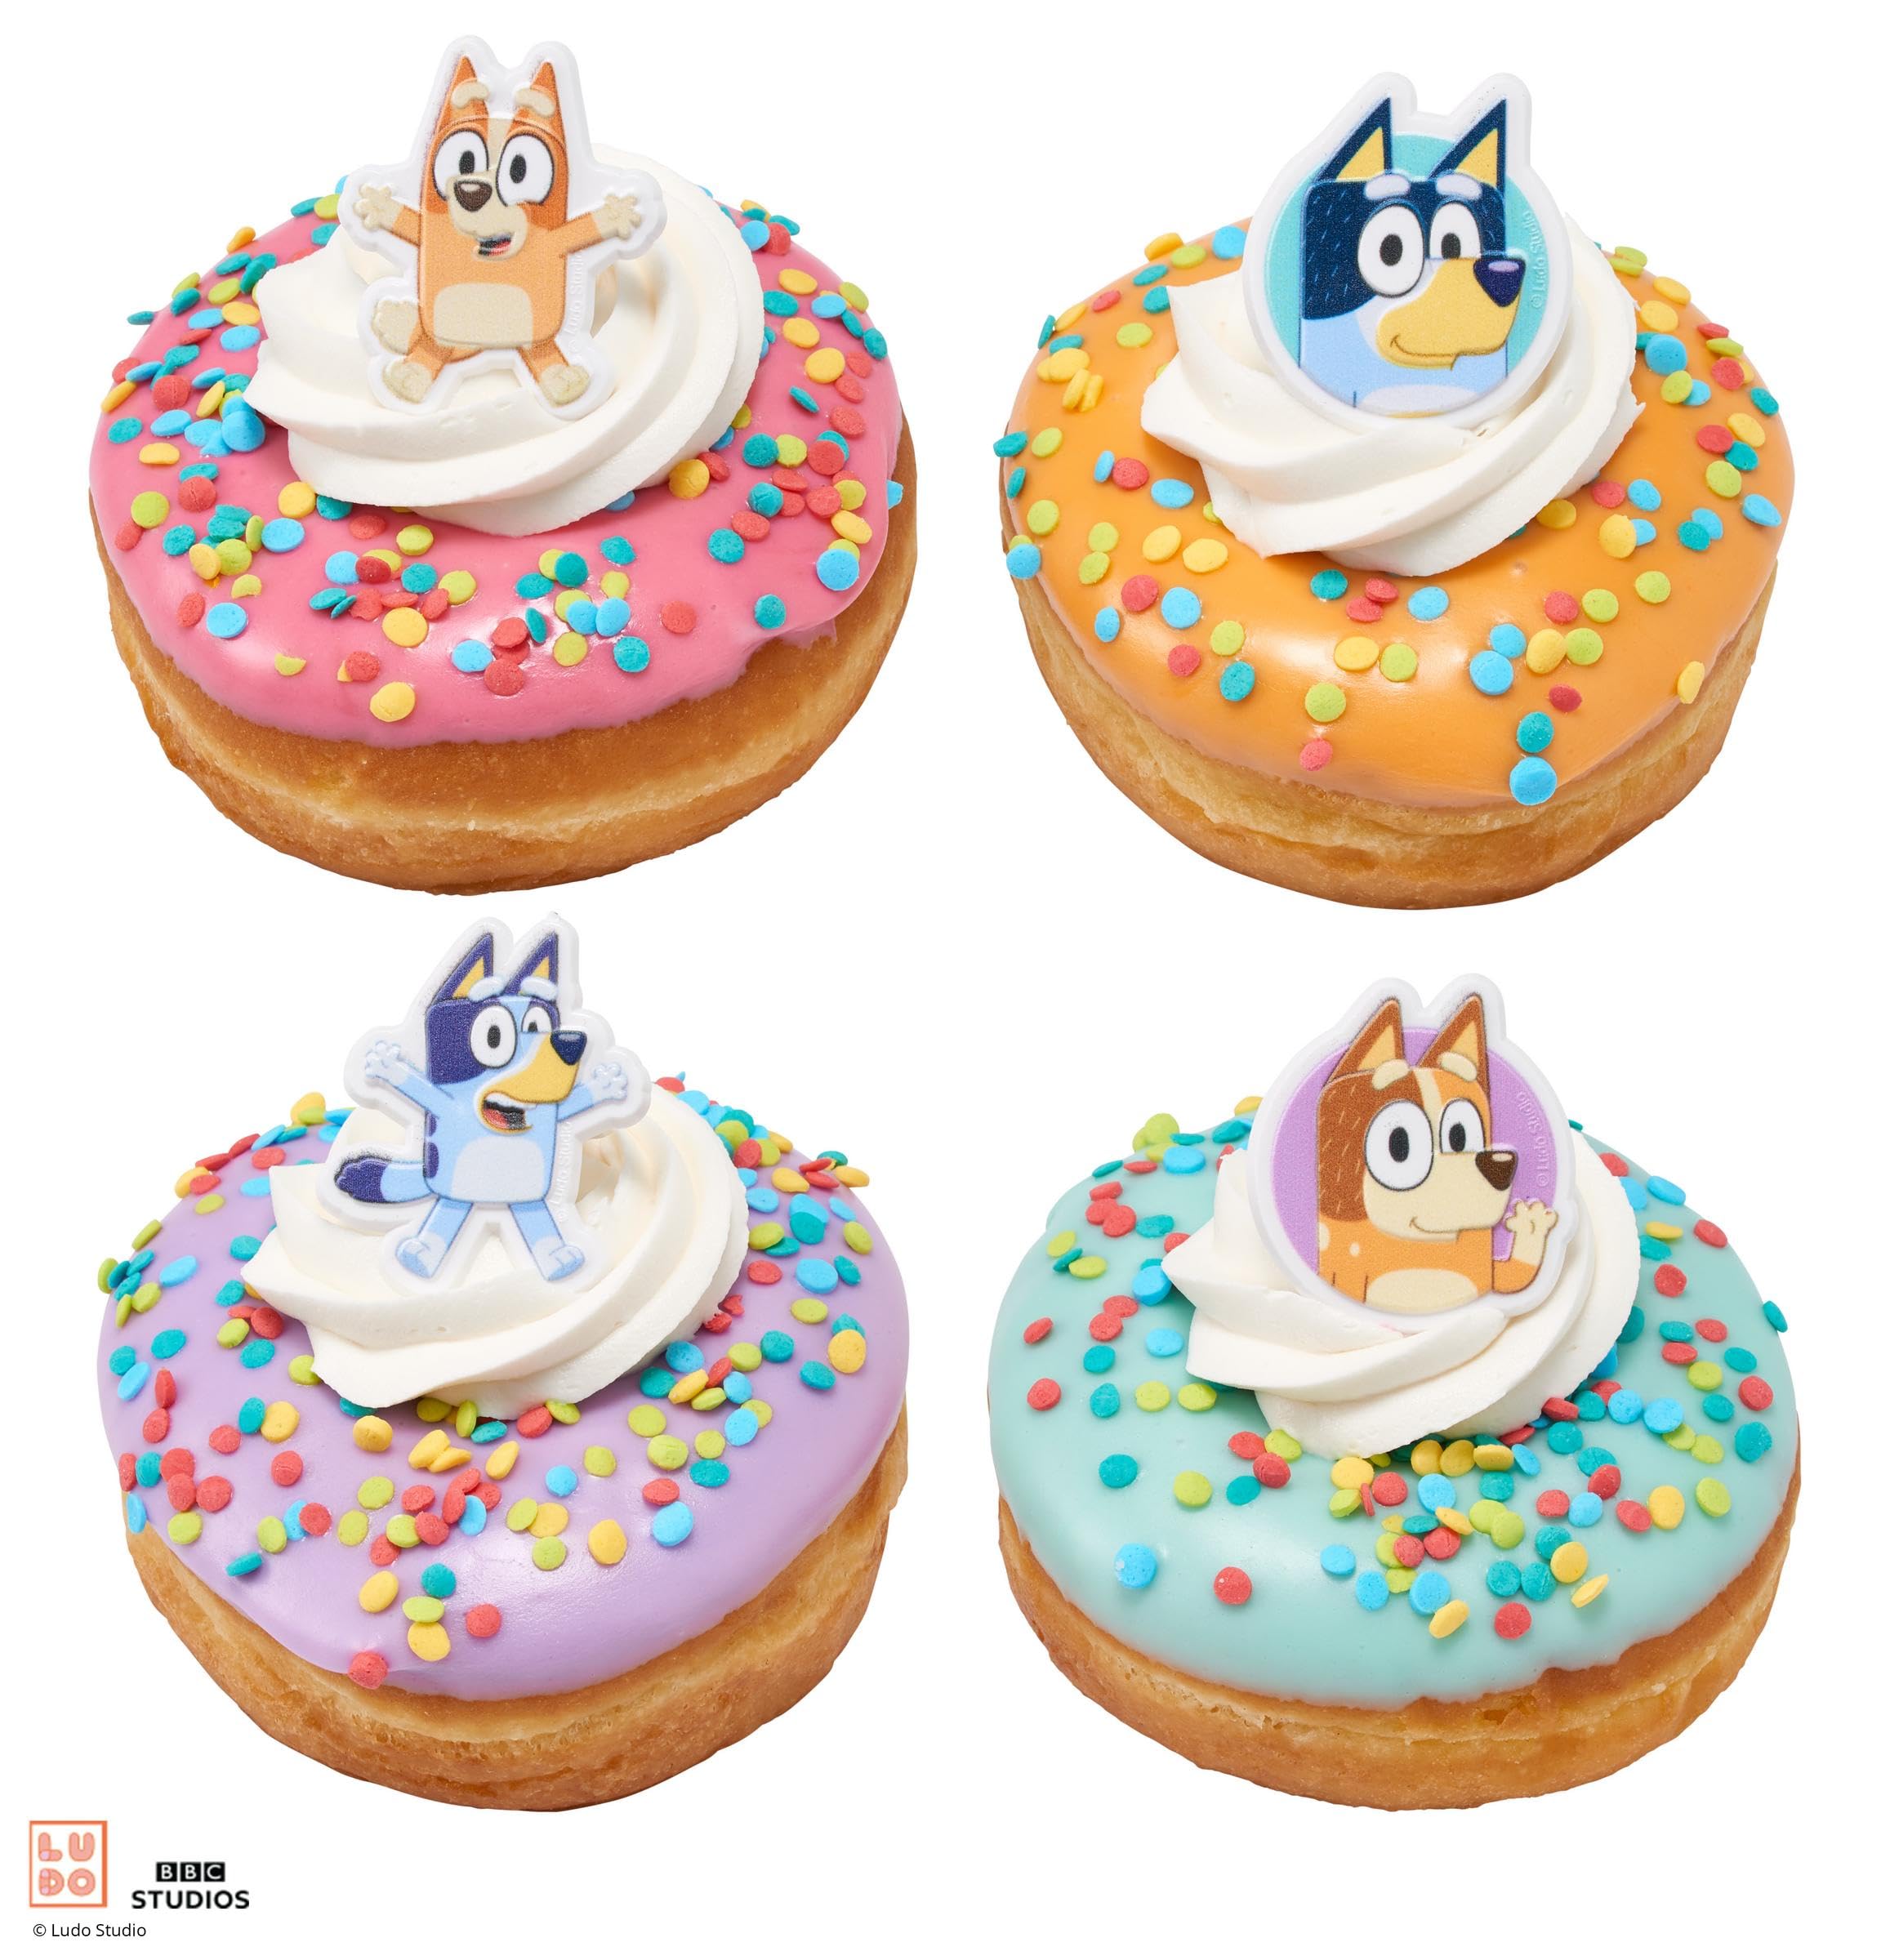 DecoPac Bluey So Much Fun Rings, Cupcake Decorations Featuring Bluey, Bingo, Bandit, and Chilli, 3D Food Safe Cake Toppers – 72 Pack